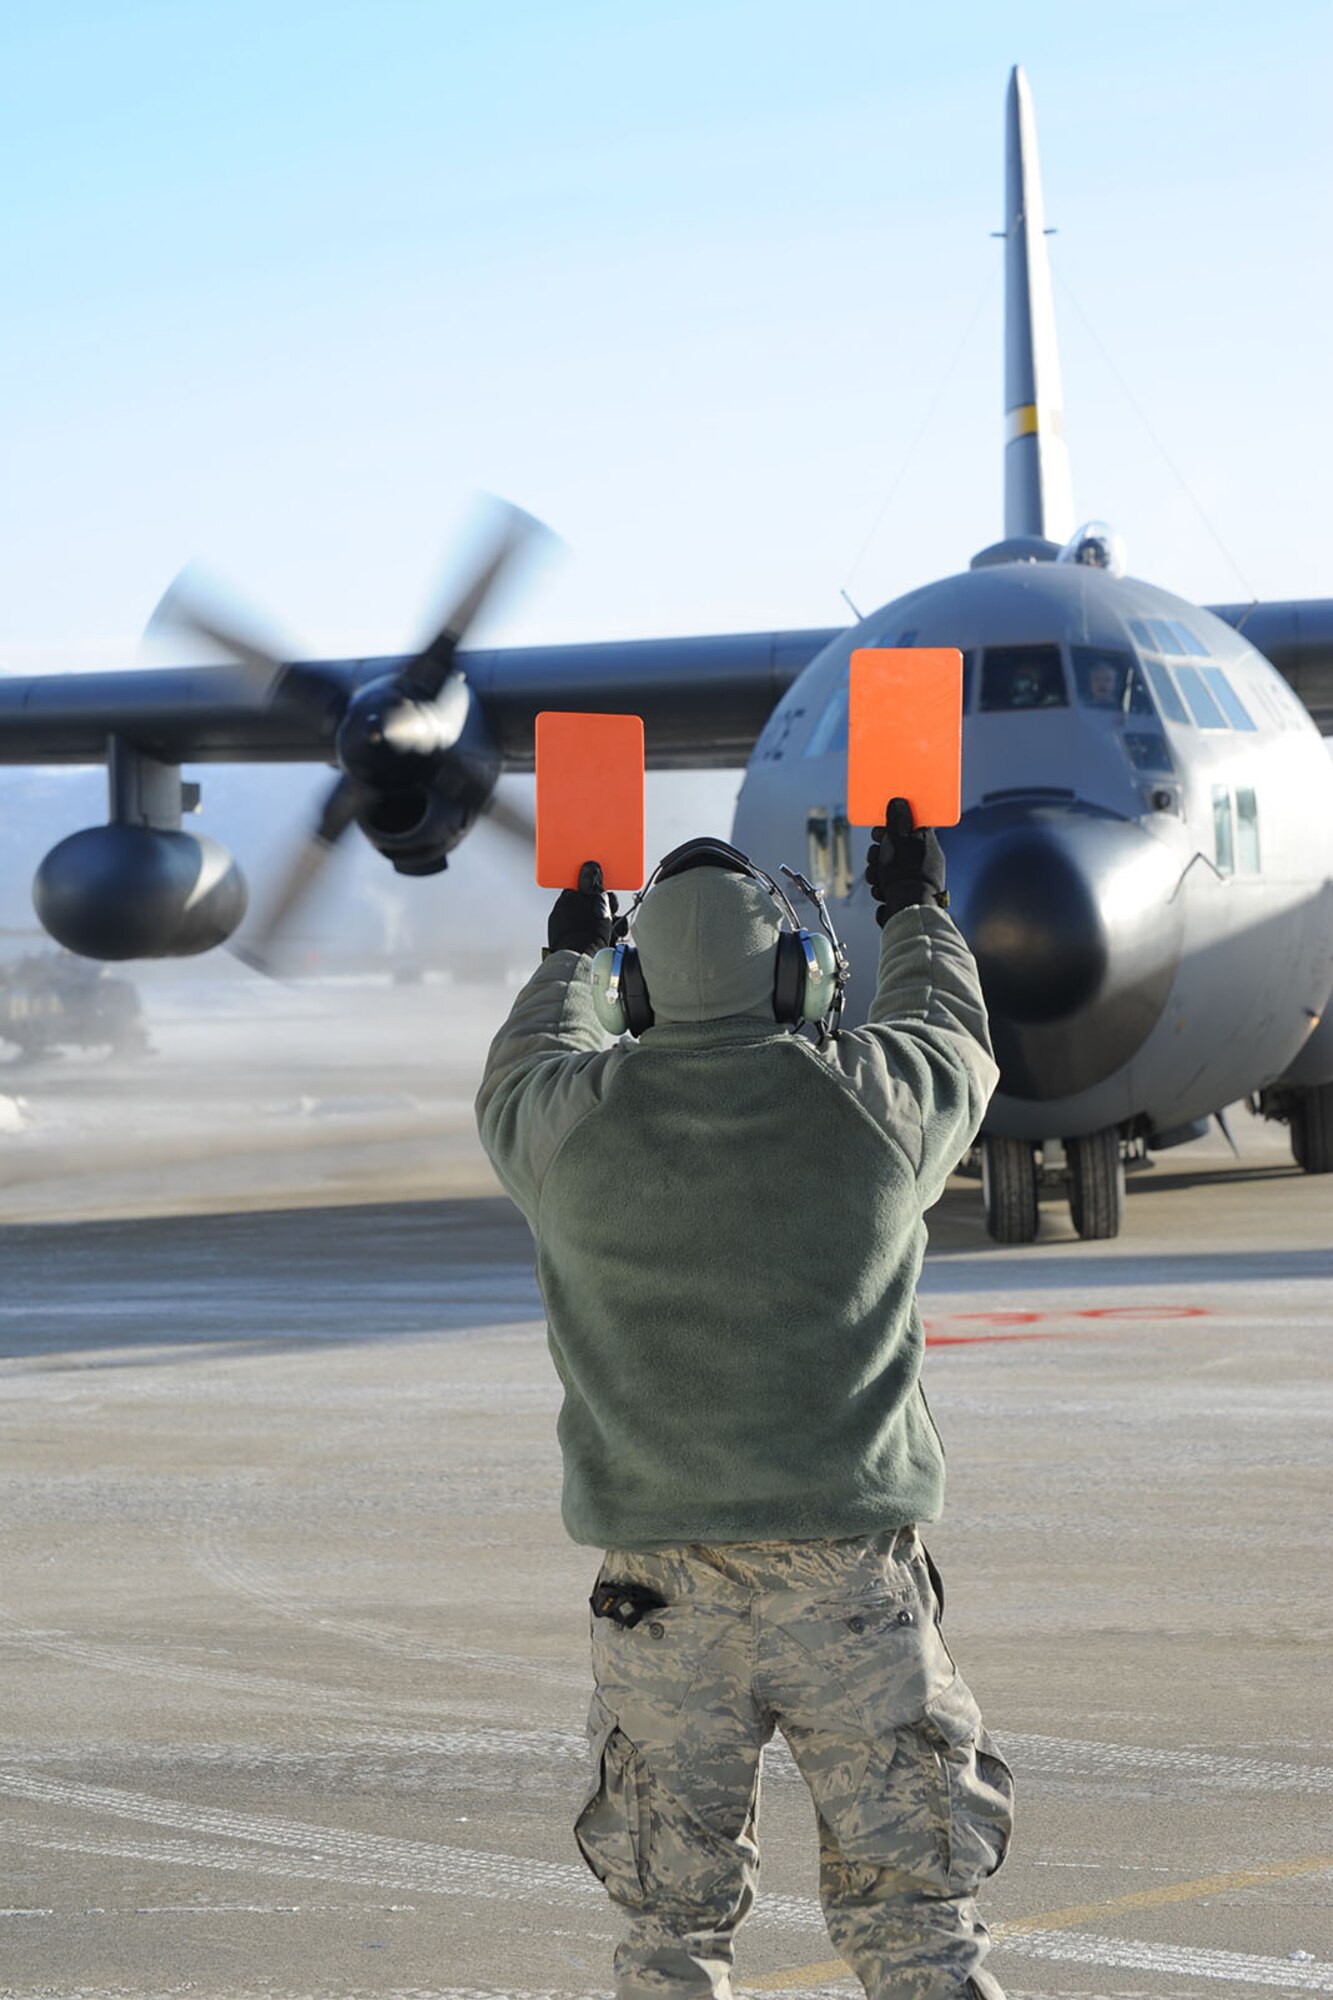 JOINT BASE ELMENDORF-RICHARDSON, Alaska - Senior Airman Alexander Van Nice, a crew chief with the 176th Aircraft Maintenance Squadron, marshals in a C-130 from the 144th Airlift Squadron, Feb. 12, 2011. The aircraft was flown from Kulis to Joint Base Elmendorf-Richardson during a ceremonial flight. The 176th Wing is relocating from Kulis to JBER per the 2005 Defense Base Closure and Realignment proposal.  Alaska Air National Guard photo by Master Sgt. Shannon Oleson.